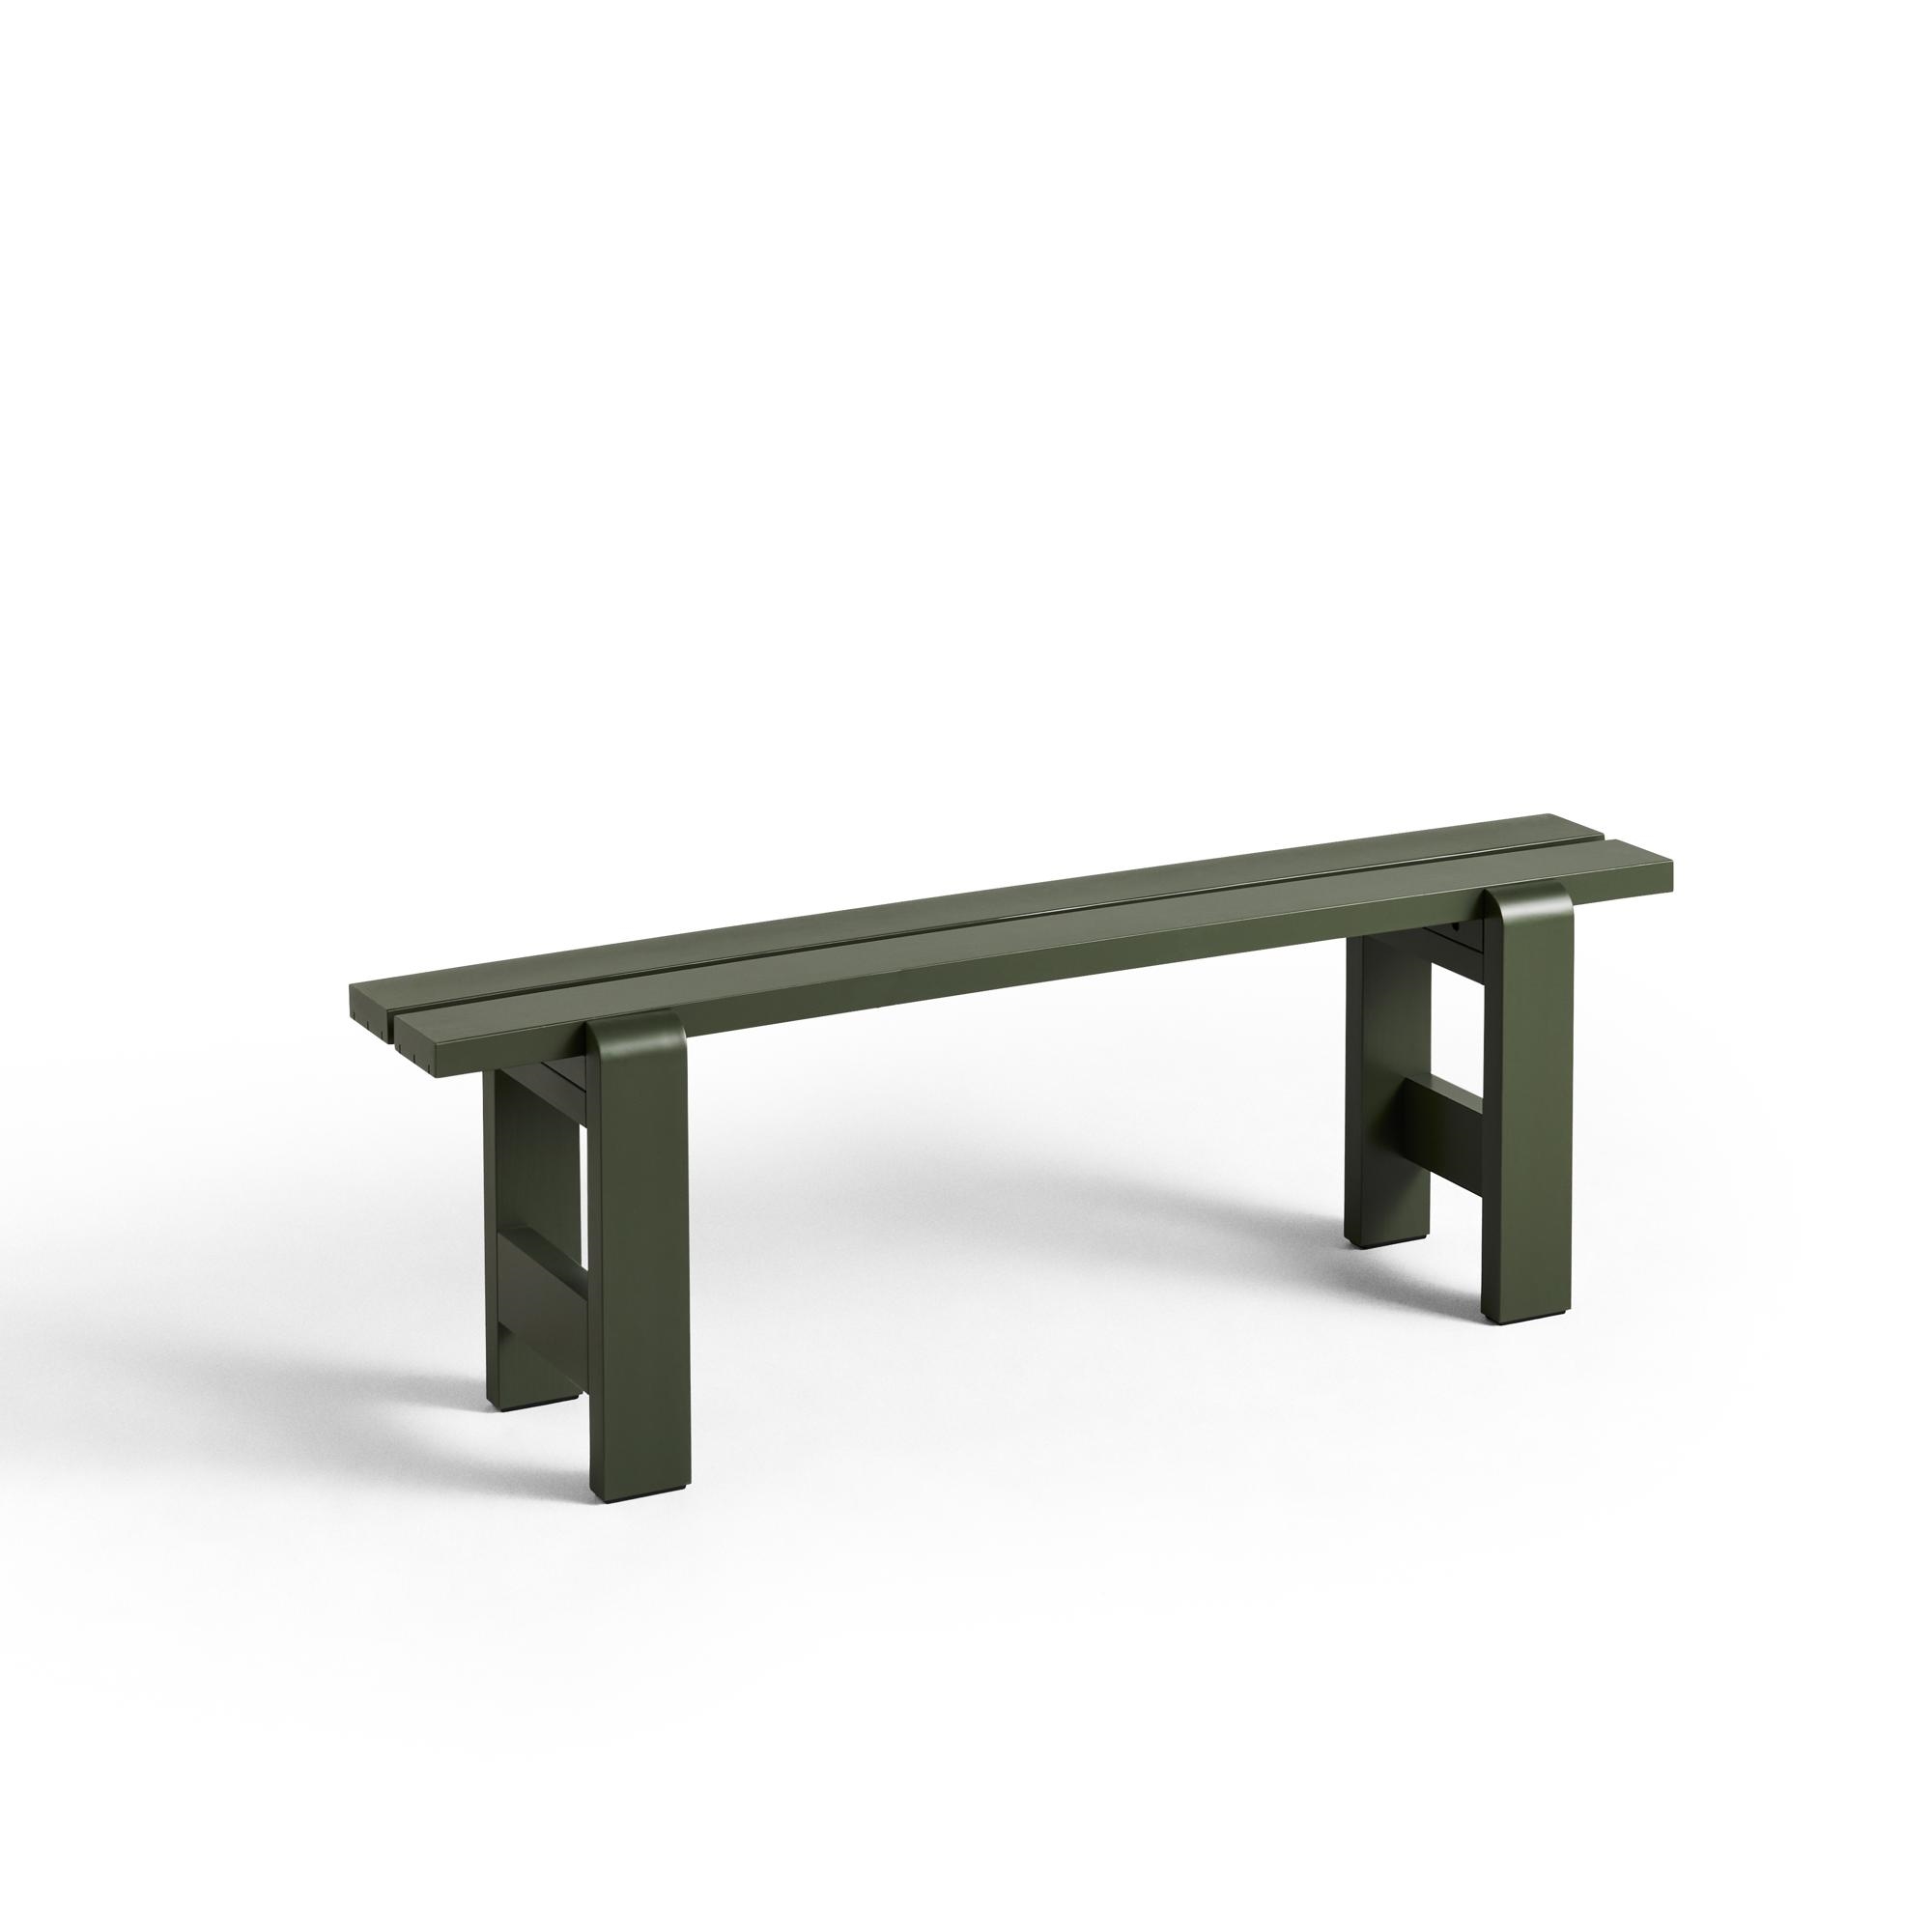 HAY Weekday Bench L140 x H45 Olive